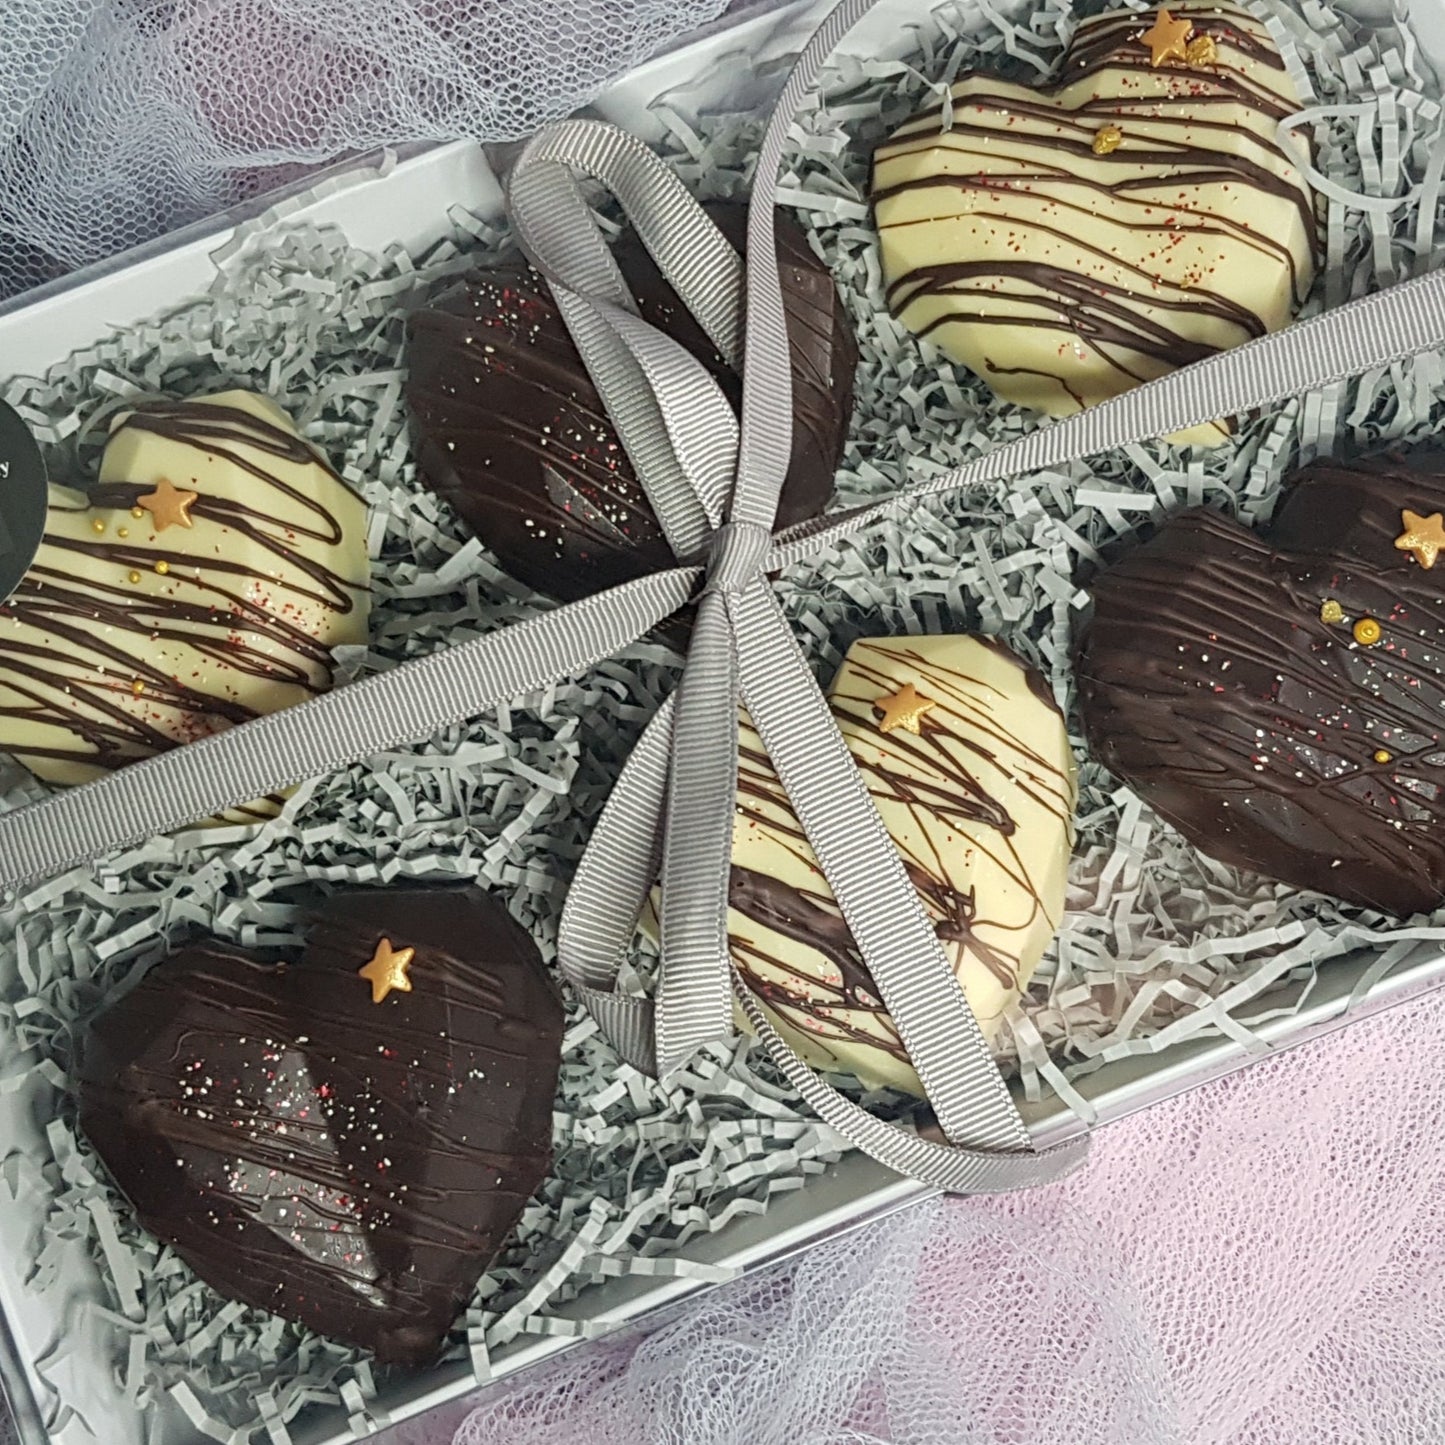 Geo heart brownies in a gift box